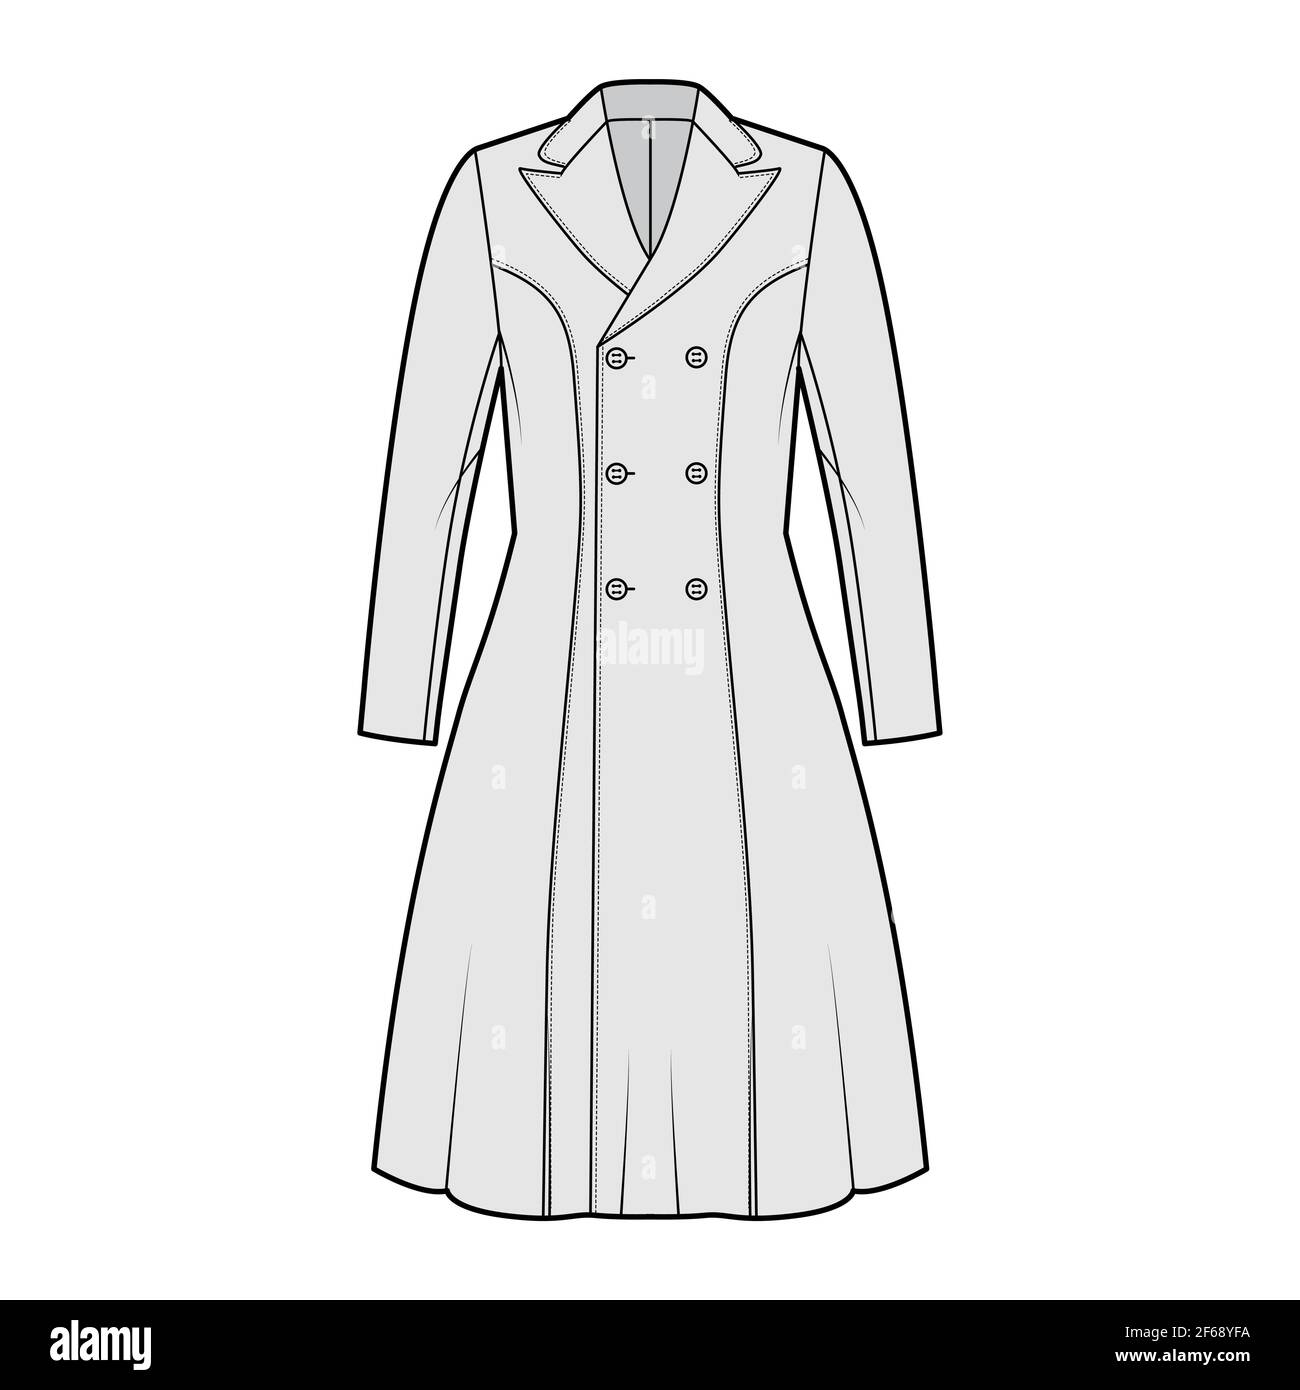 Princess line coat technical fashion illustration with double breasted ...